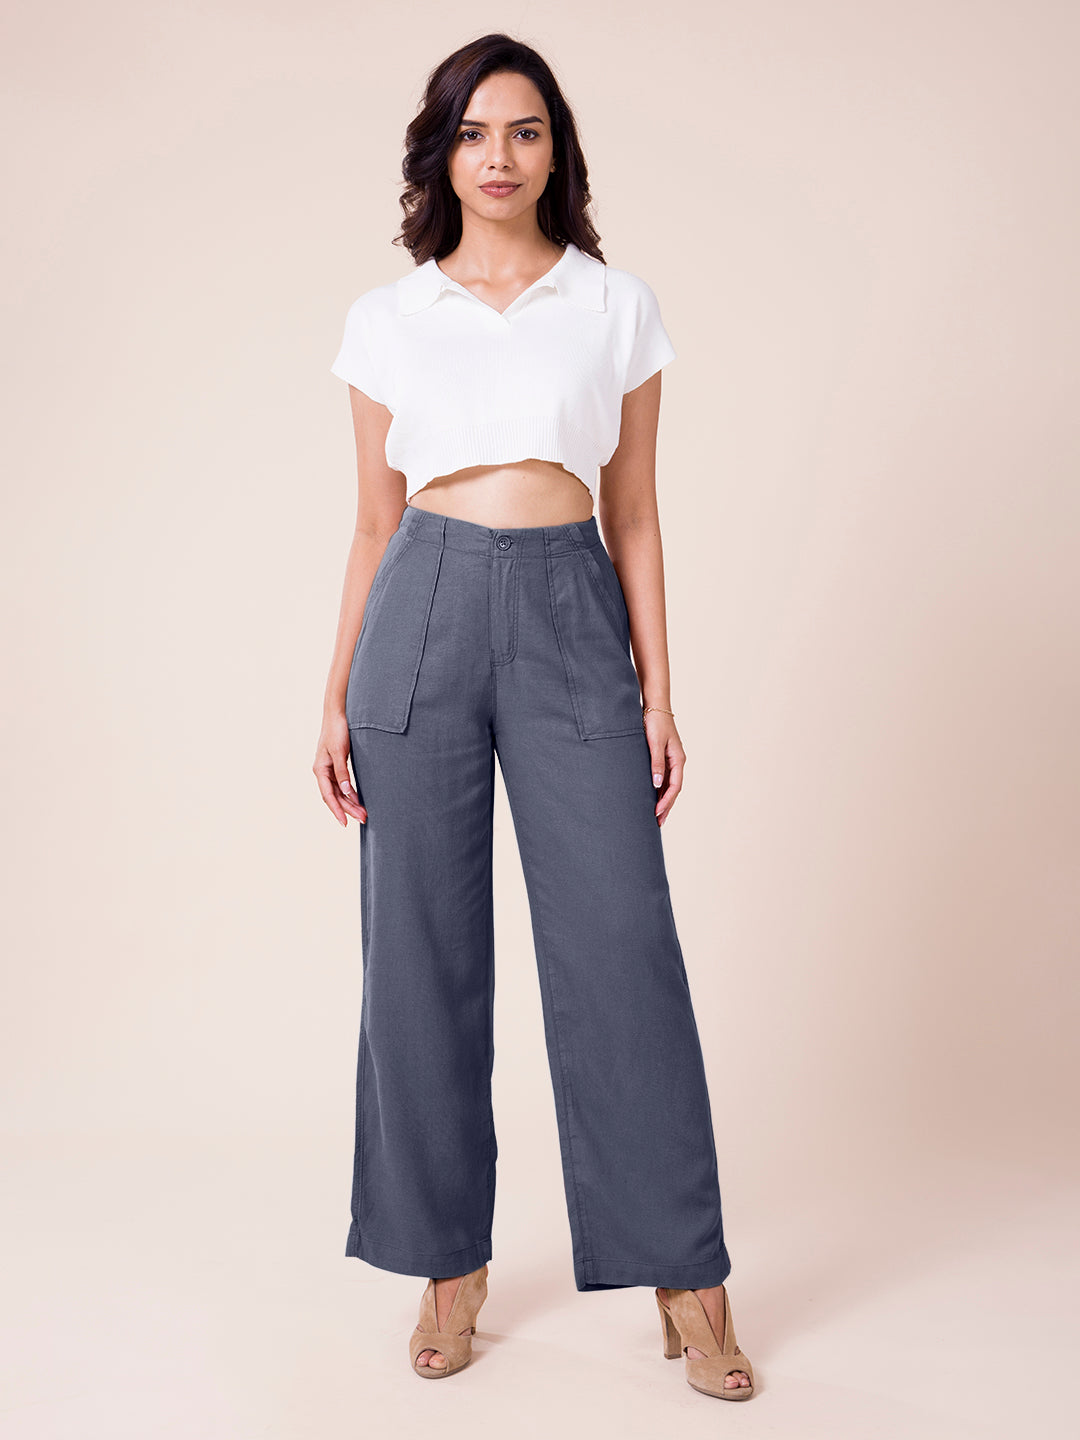 Go Colors White Trousers - Buy Go Colors White Trousers online in India